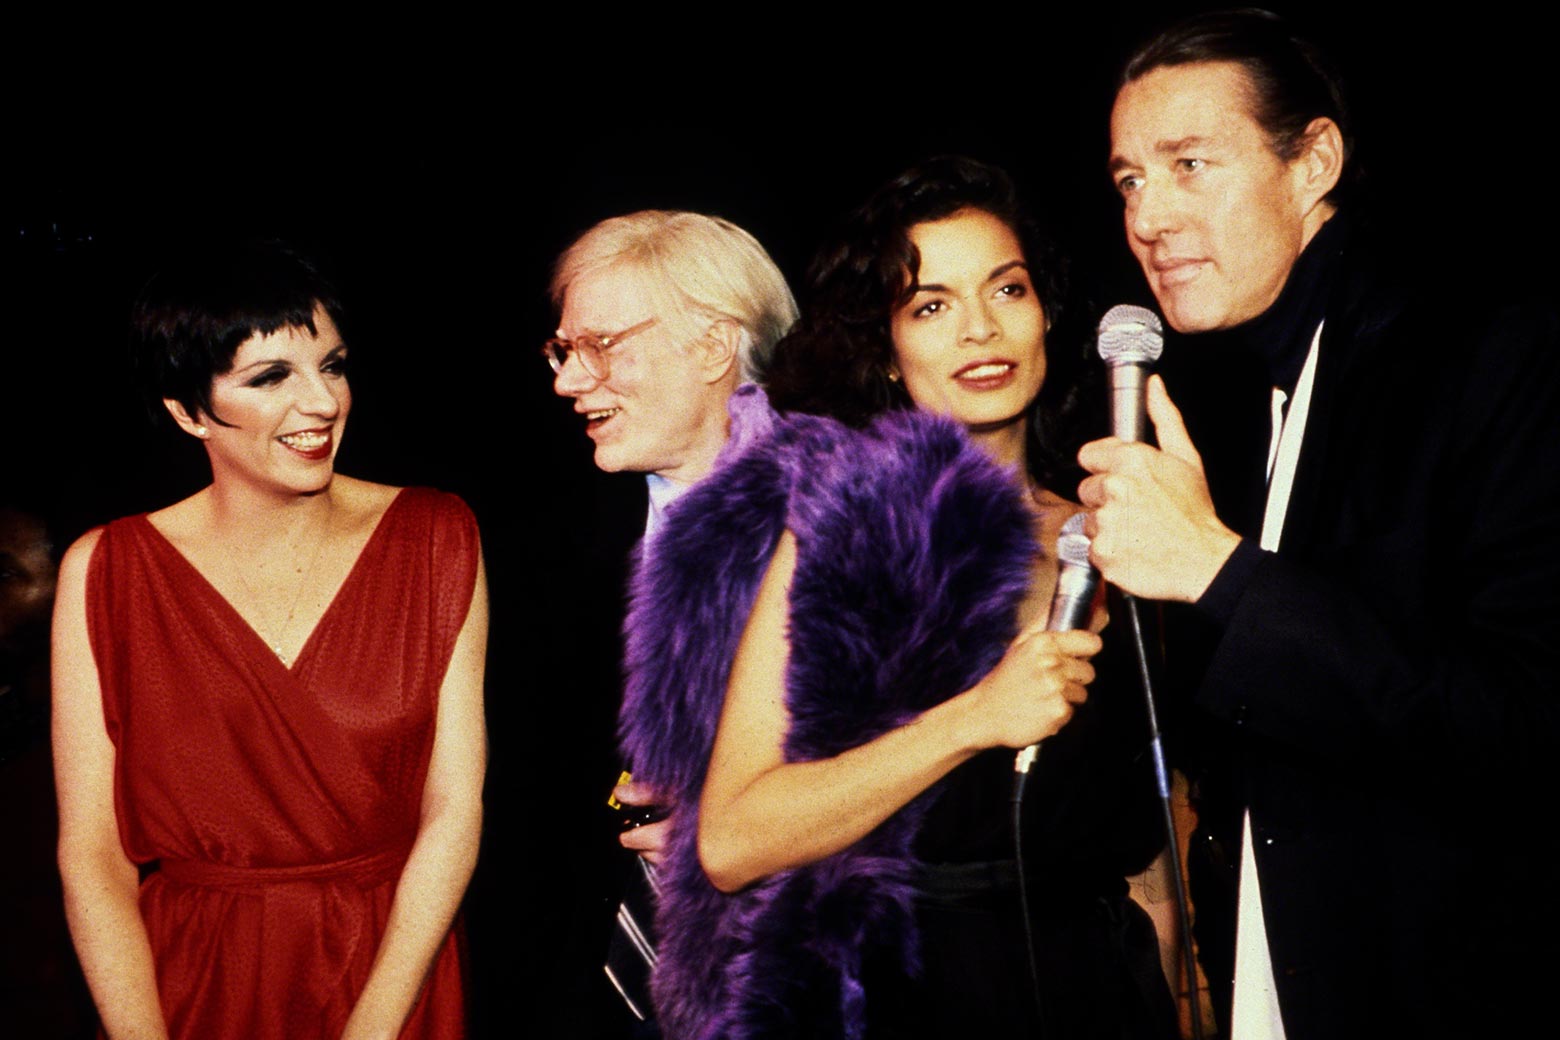 Liza Minnelli, Andy Warhol, Bianca Jagger, and Halston. Halston and Jagger hold microphones.